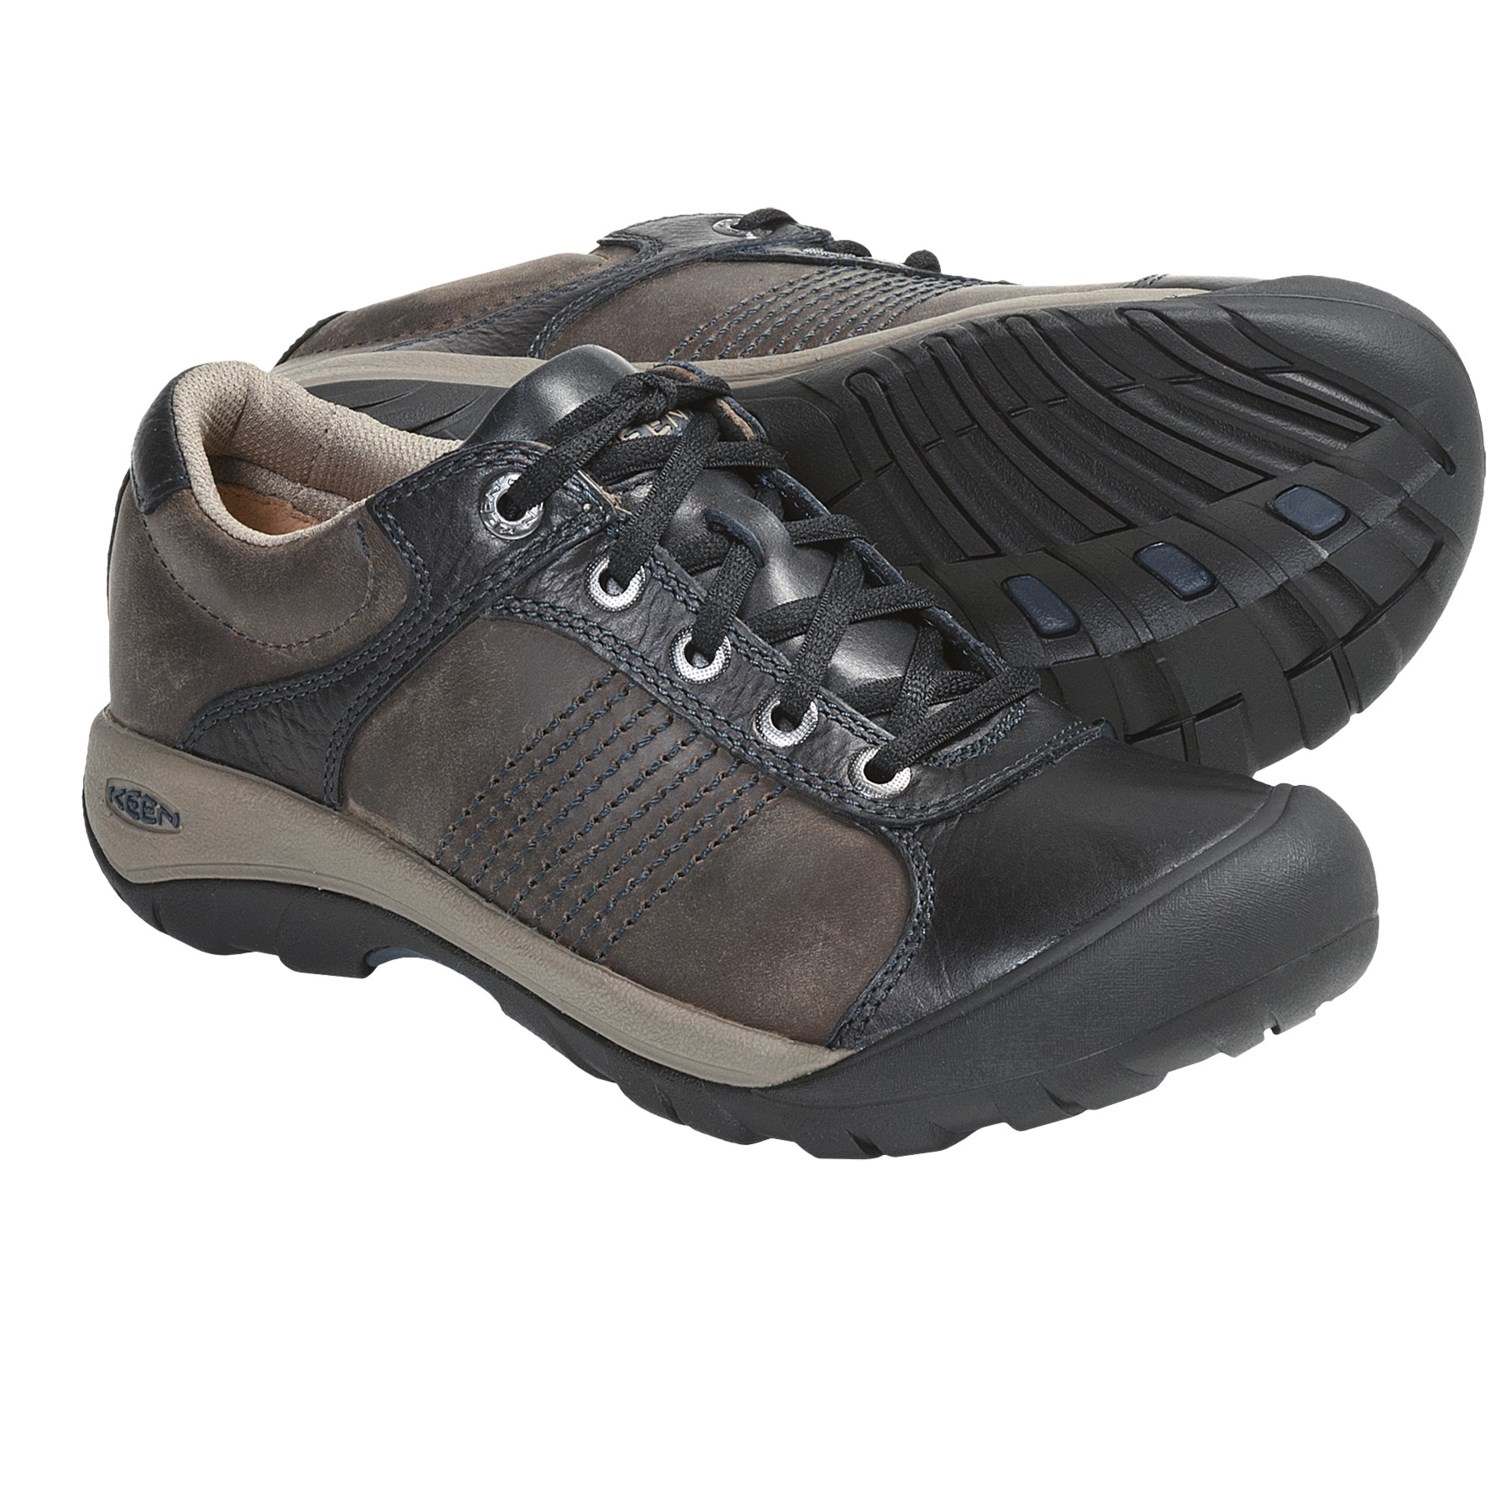 Keen Finlay Shoes (For Men) in India InkBrindle